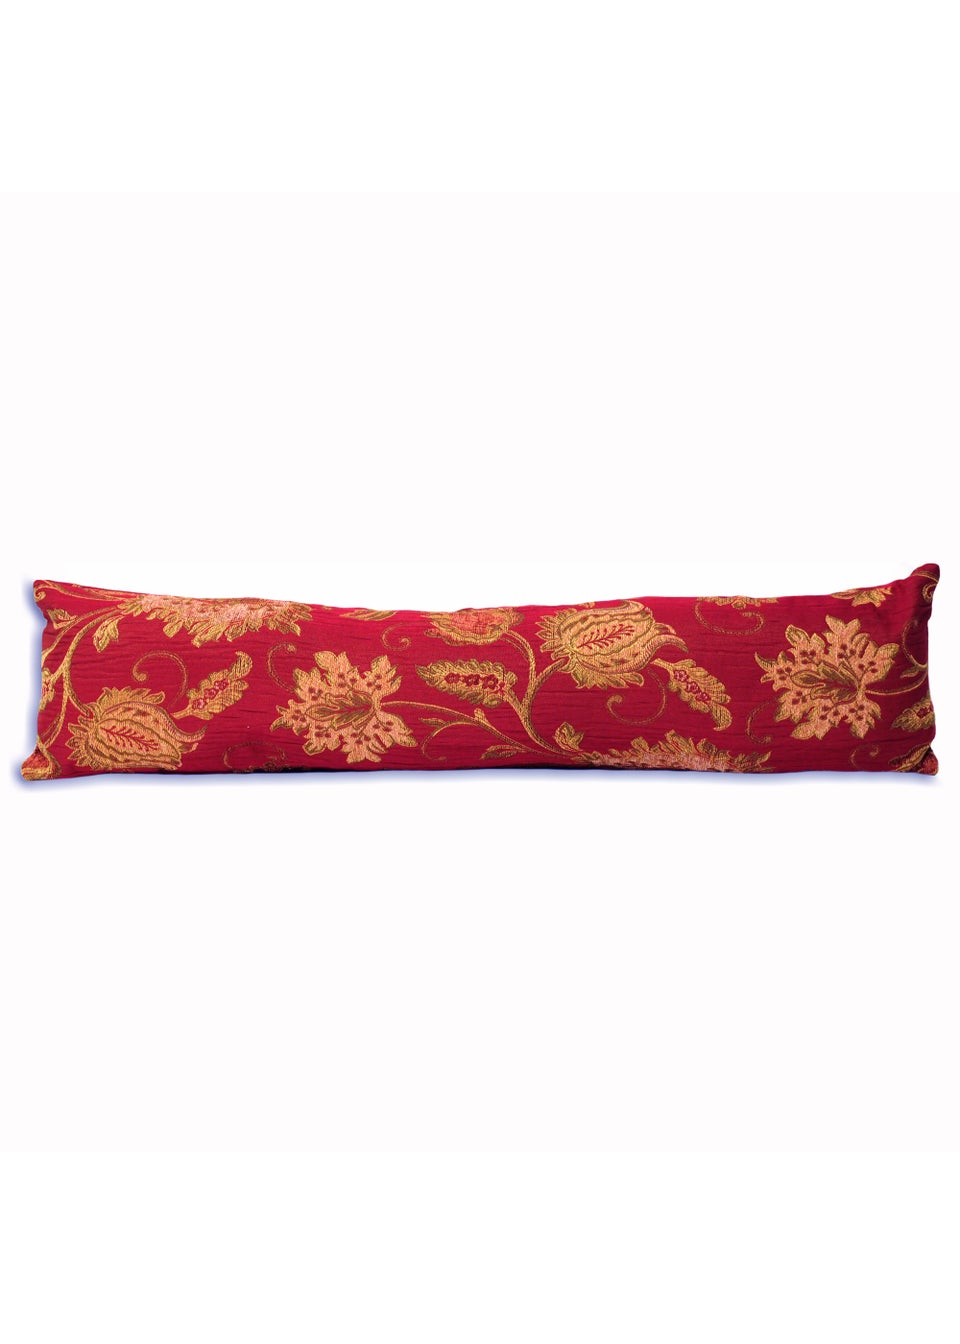 Paoletti Zurich Floral Jacquard Draught Excluder (90cm x 22cm)